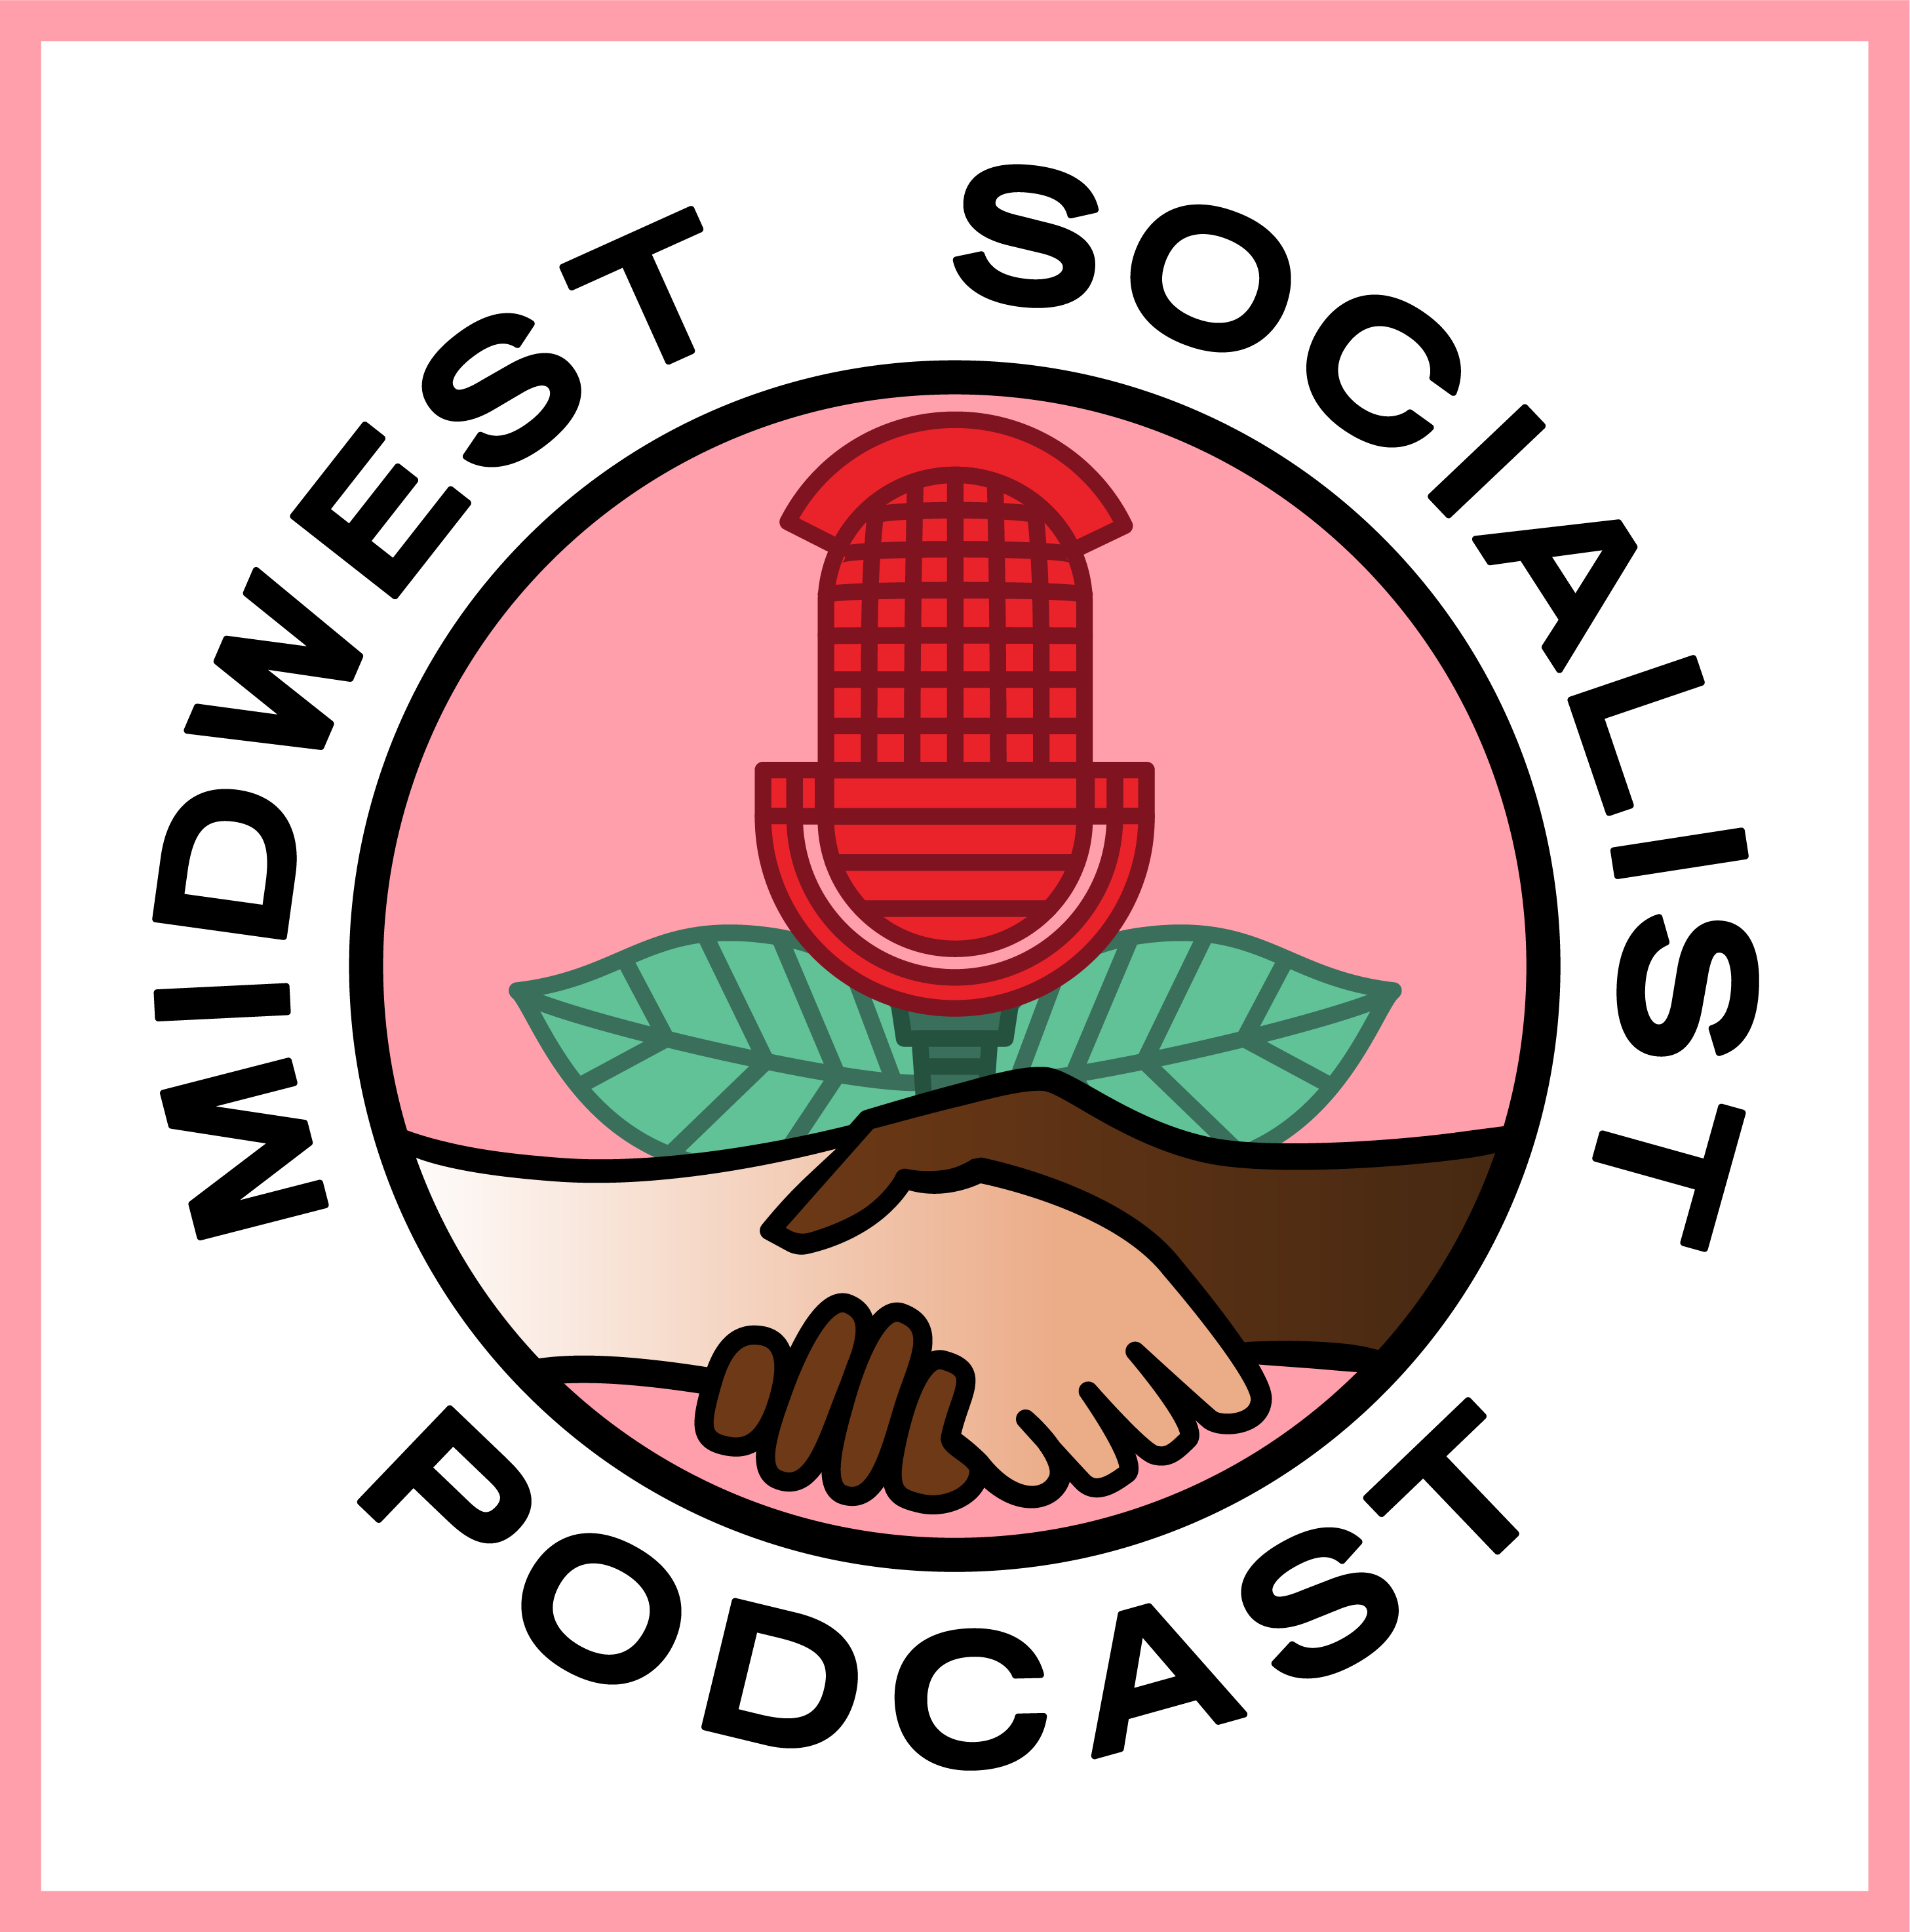 The Midwest Socialist Podcast